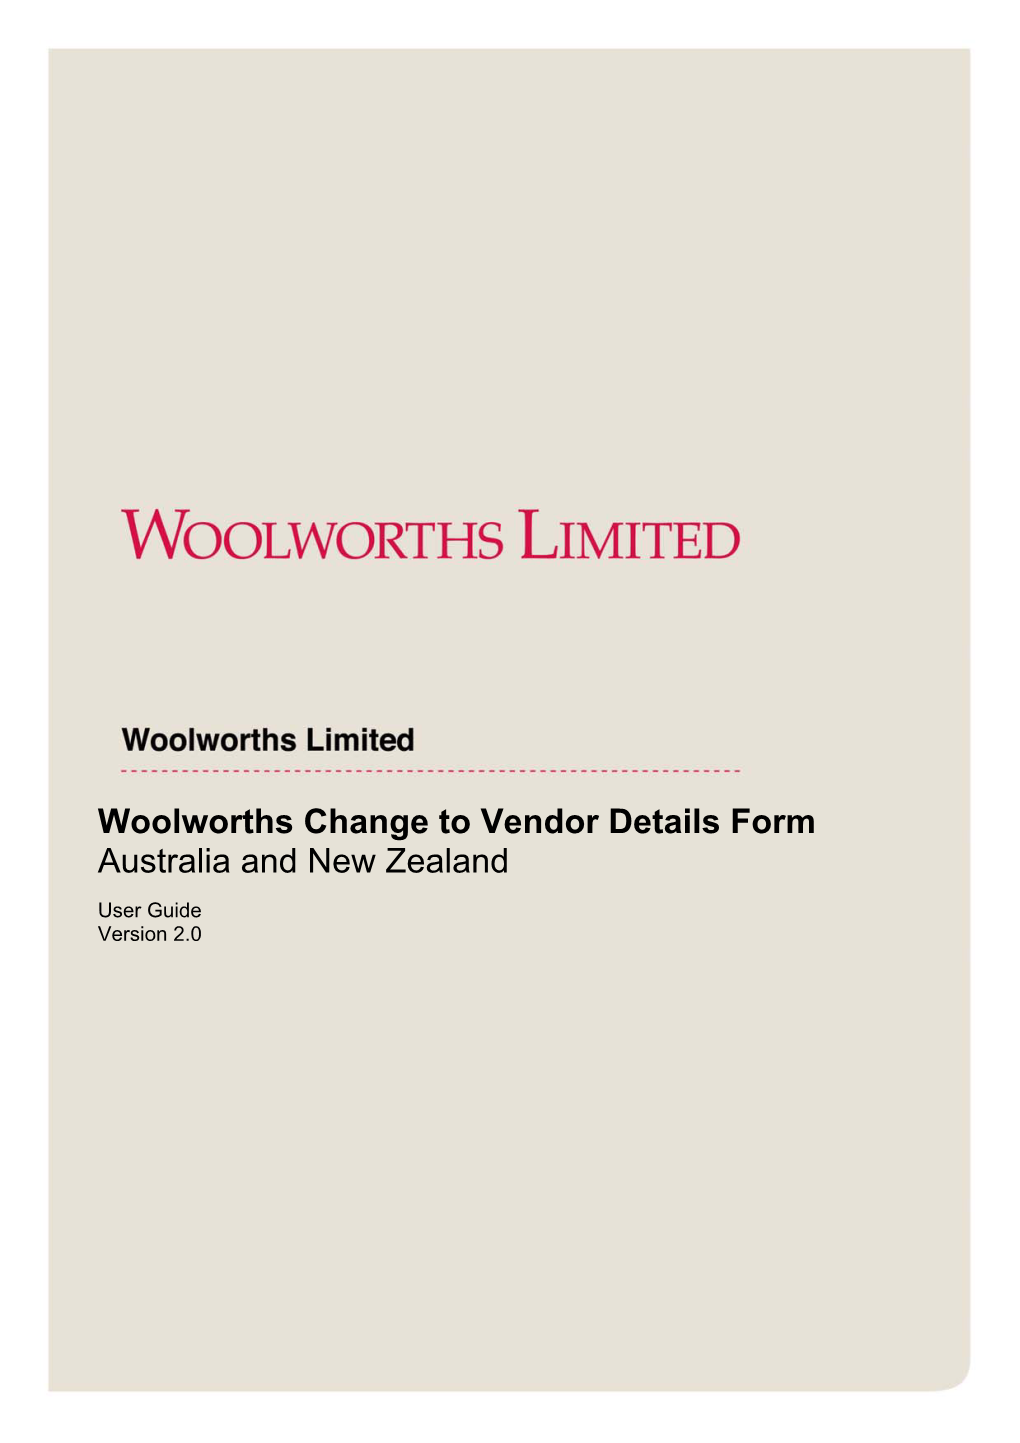 Woolworths Change to Vendor Details Form Australia and New Zealand